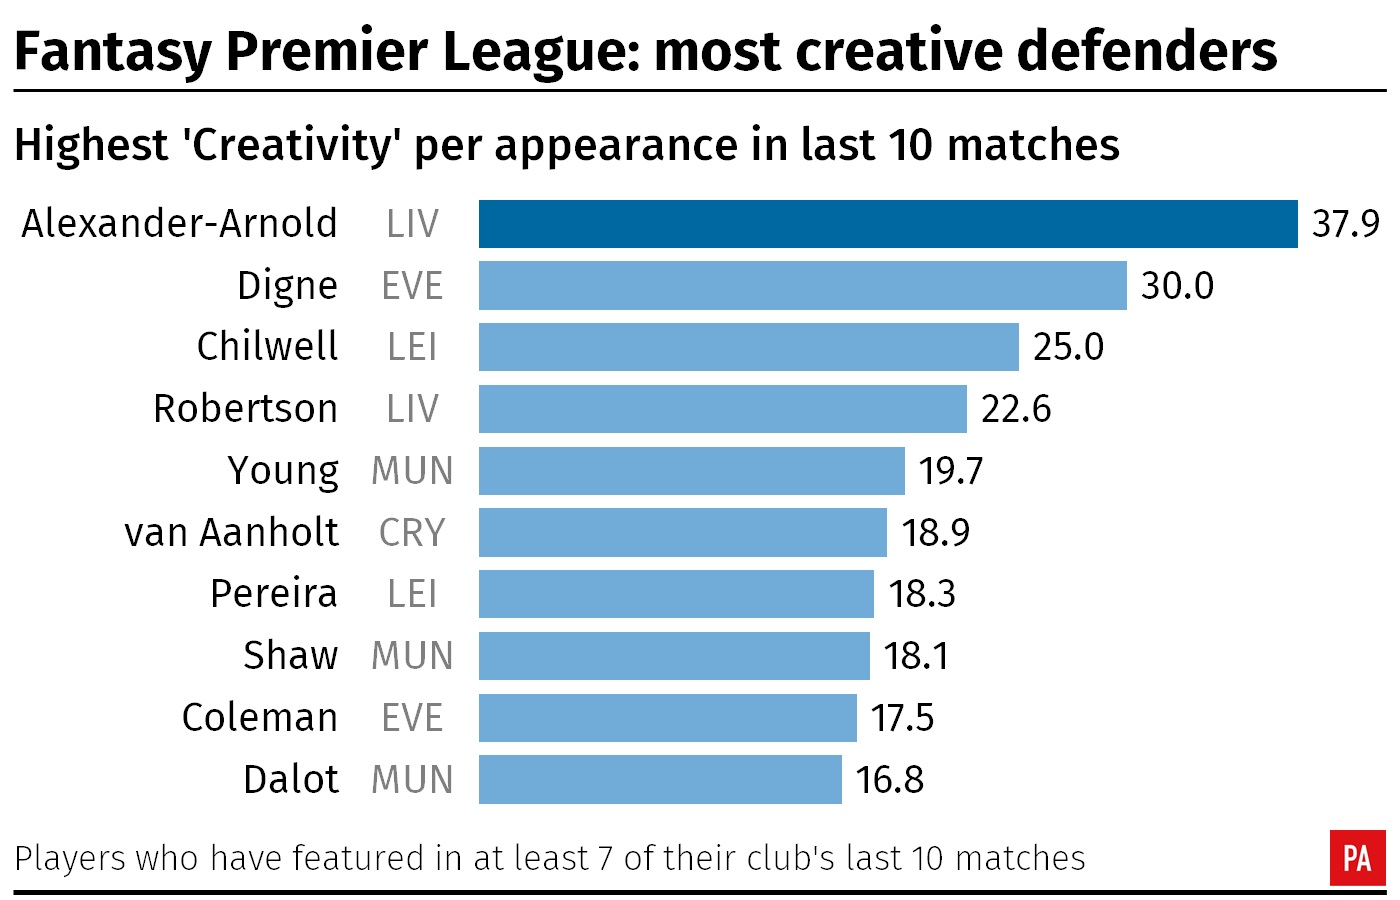 A table showing the most creative defenders over the past 10 Premier League games according to the Fantasy Premier League's Creativity score